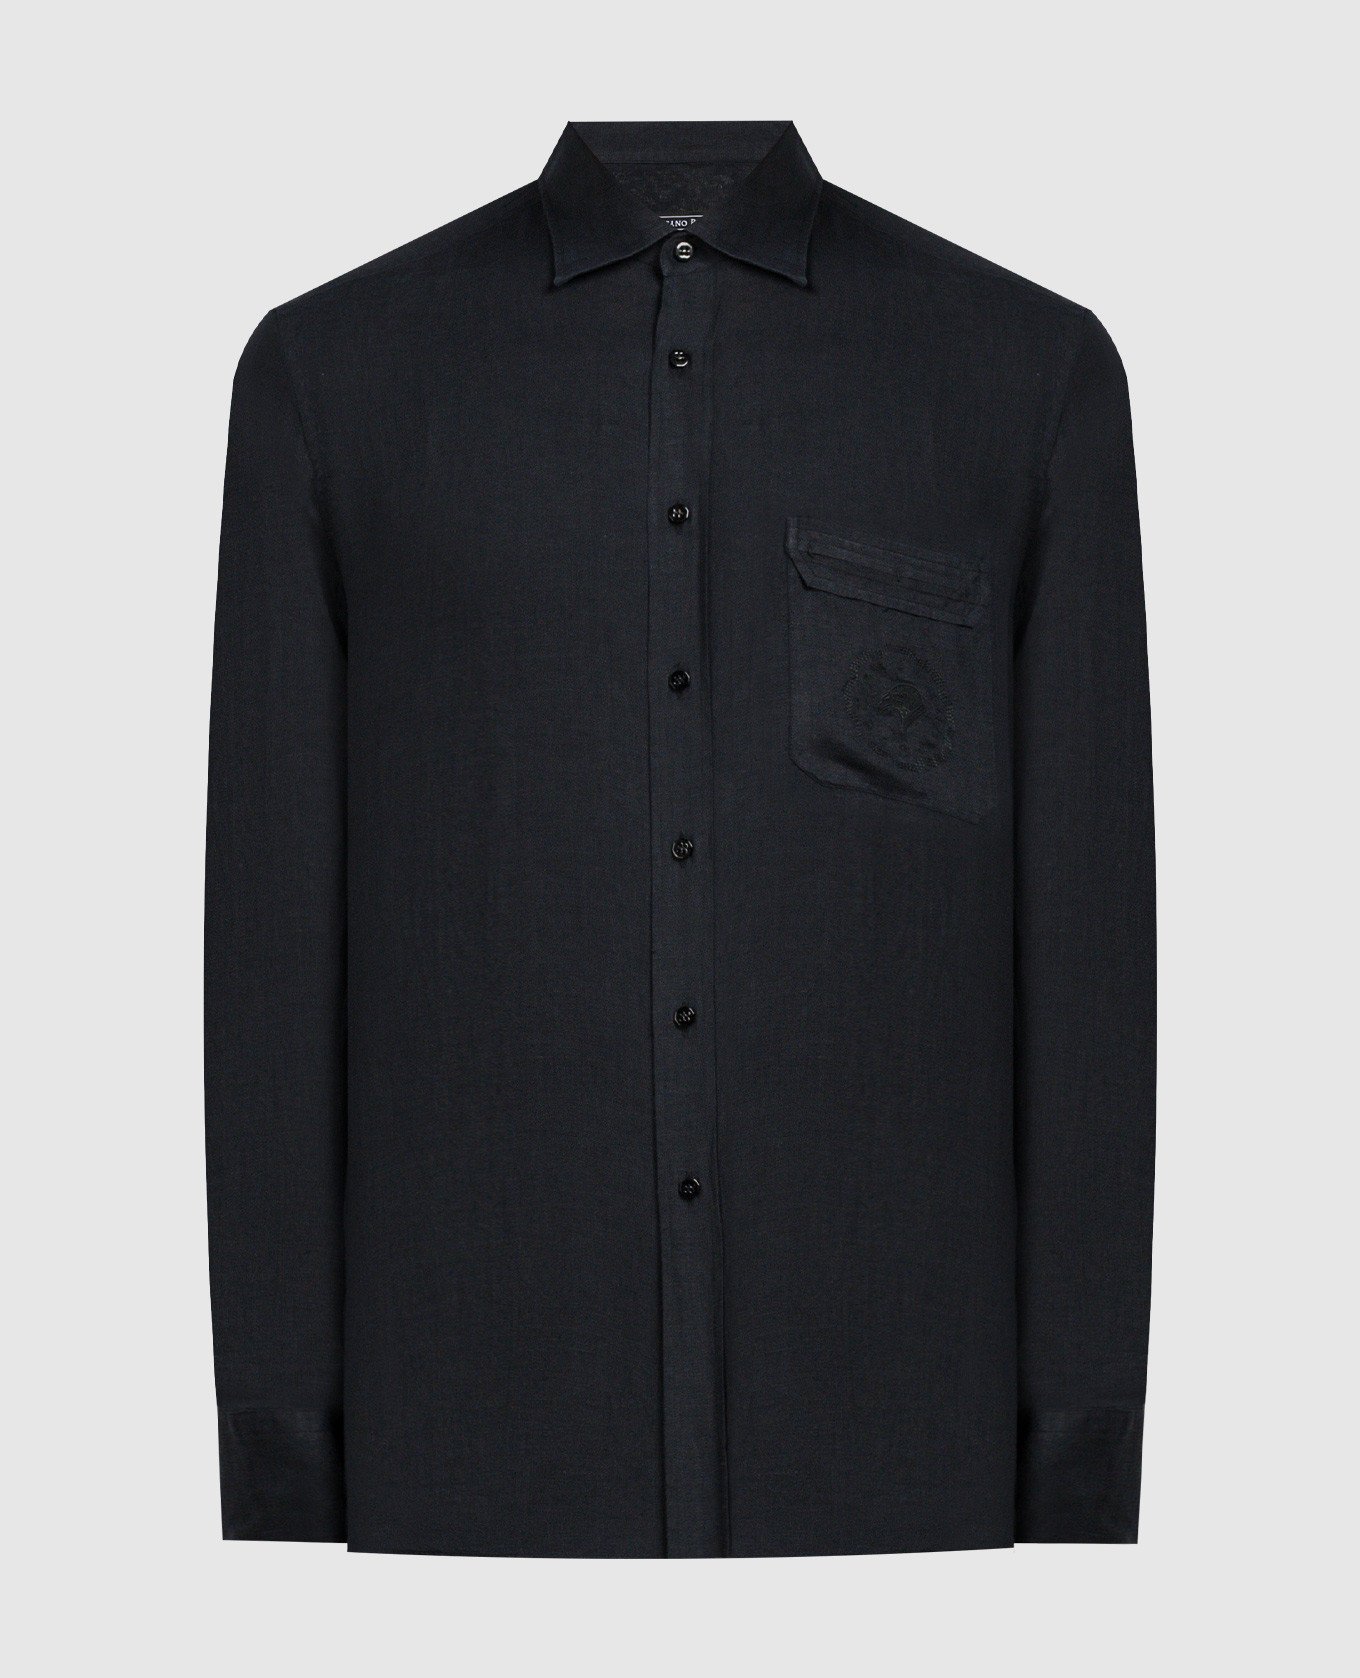 Black linen shirt with logo embroidery